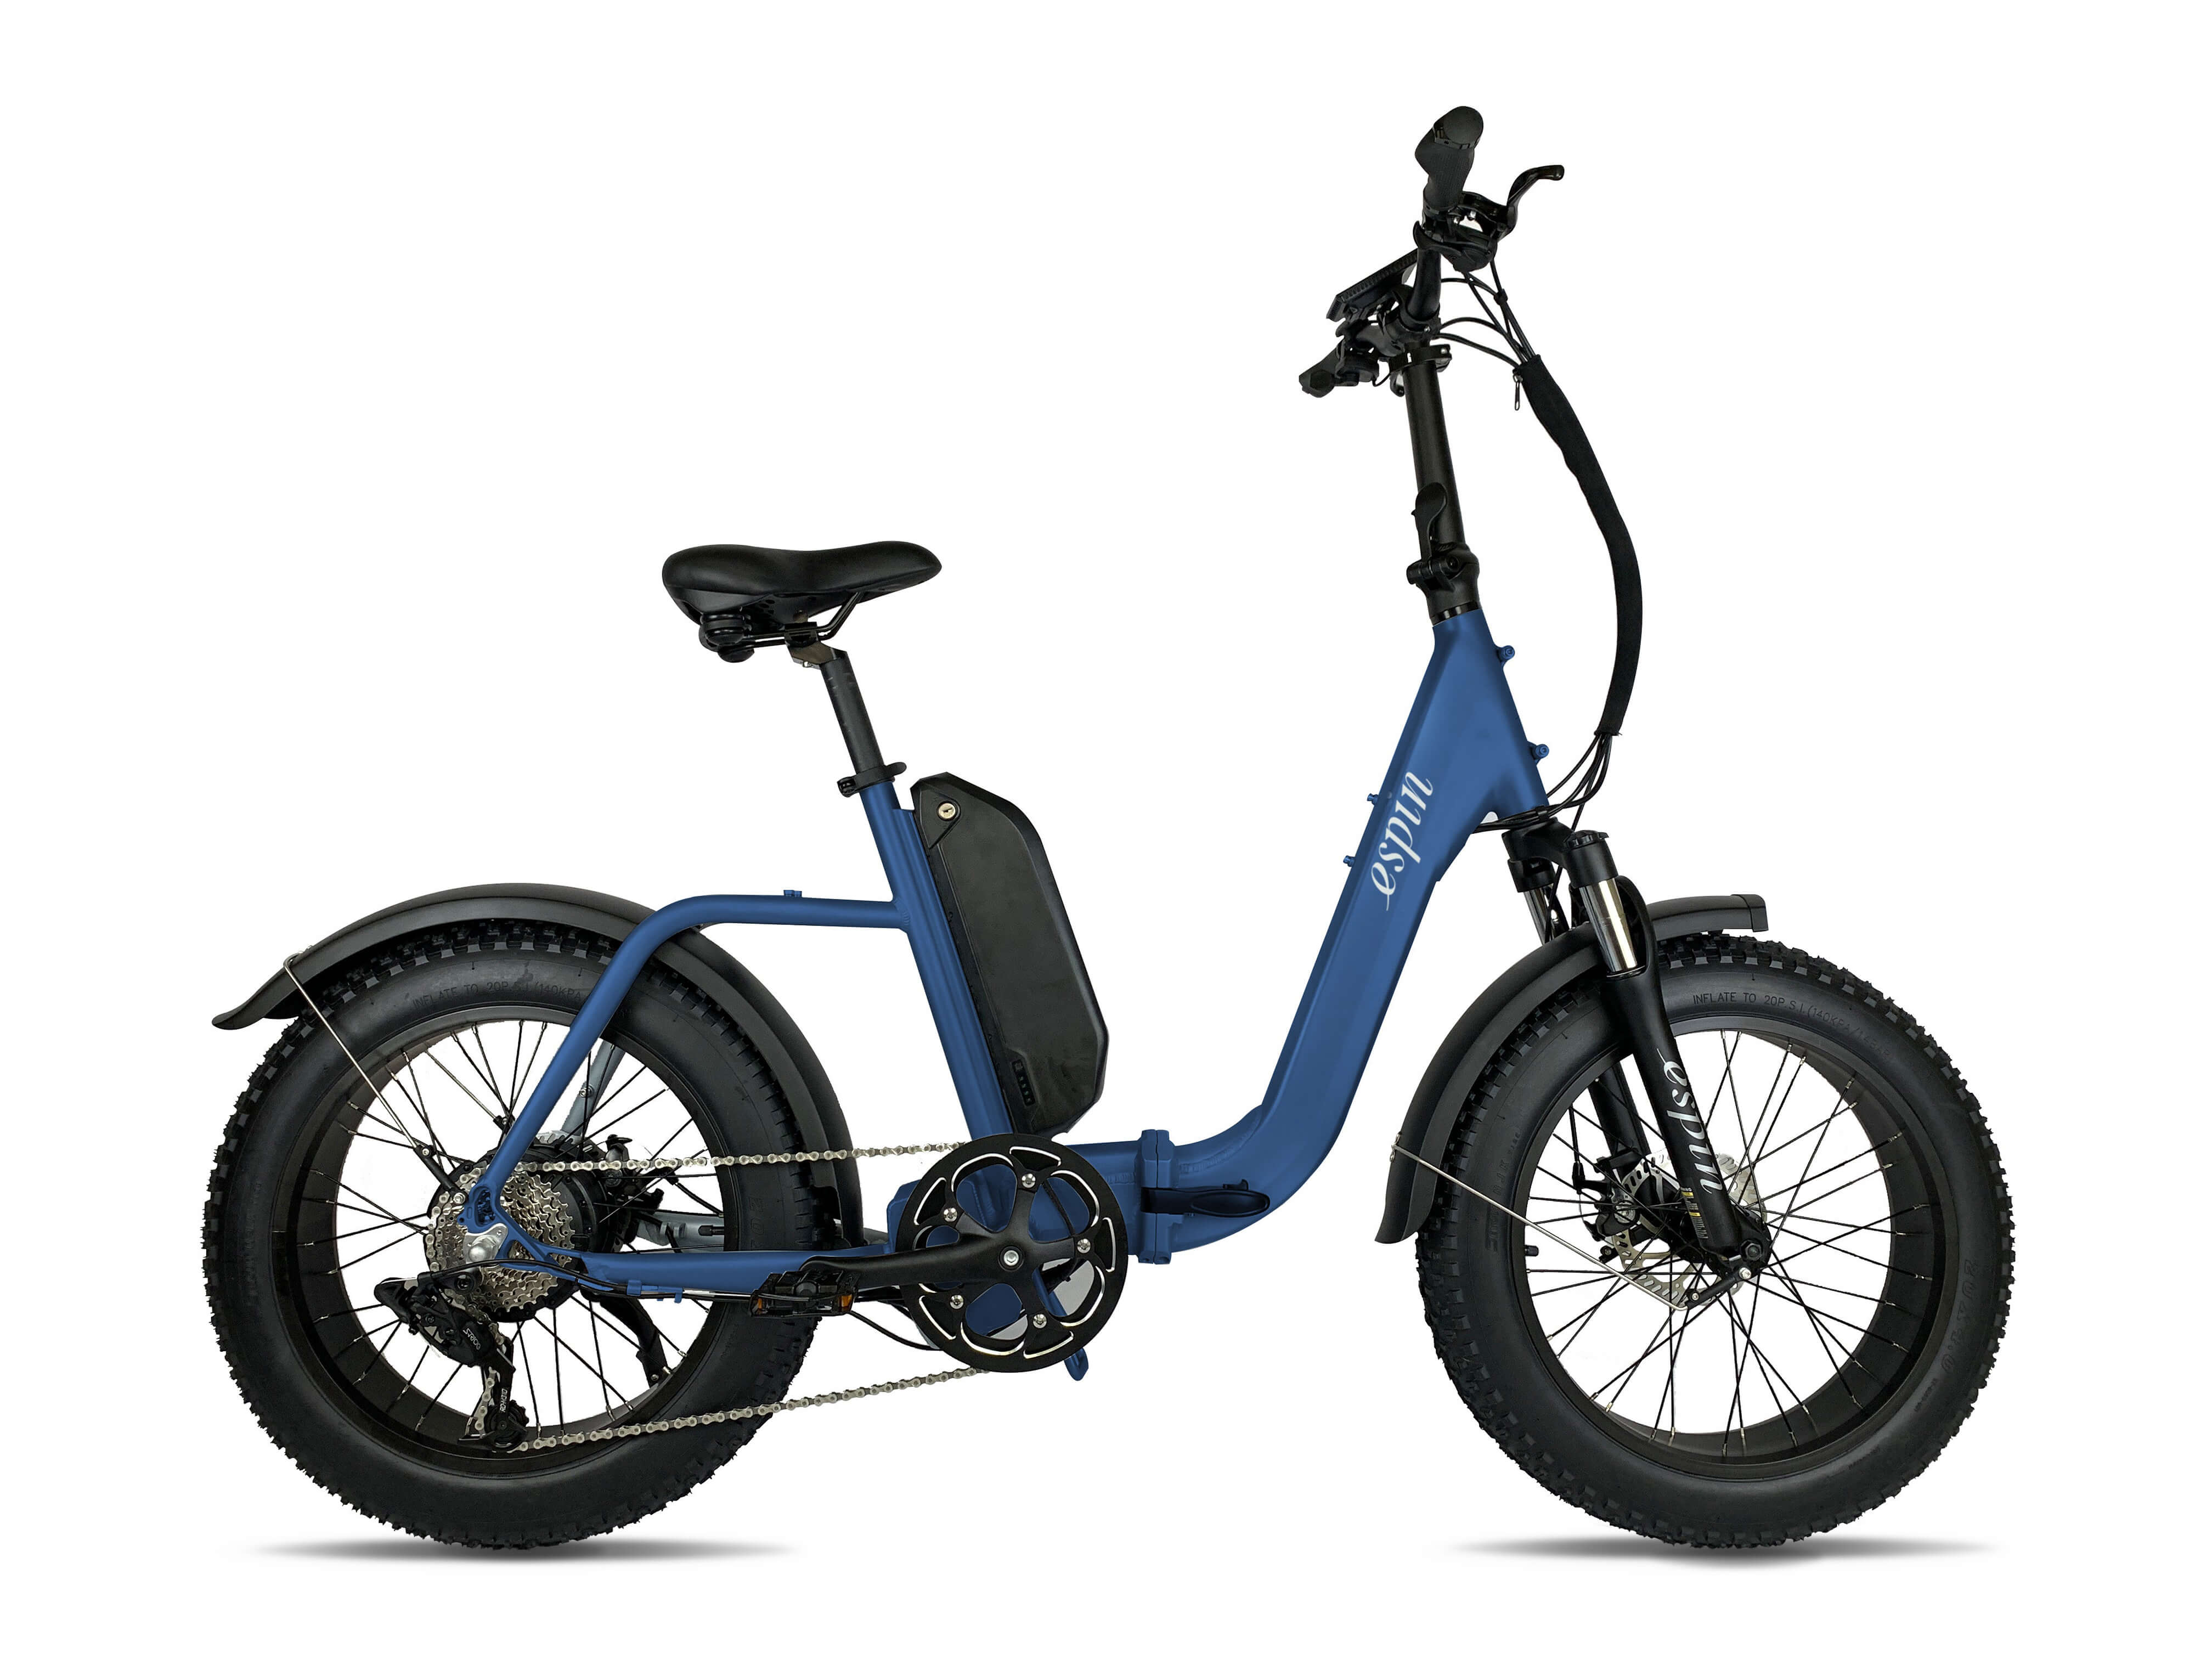 Espin nesta Folding Fat Tire Electric Bike & City Bicycle & urban commuter   with step-through frame that is ready to conquer any and all terrain